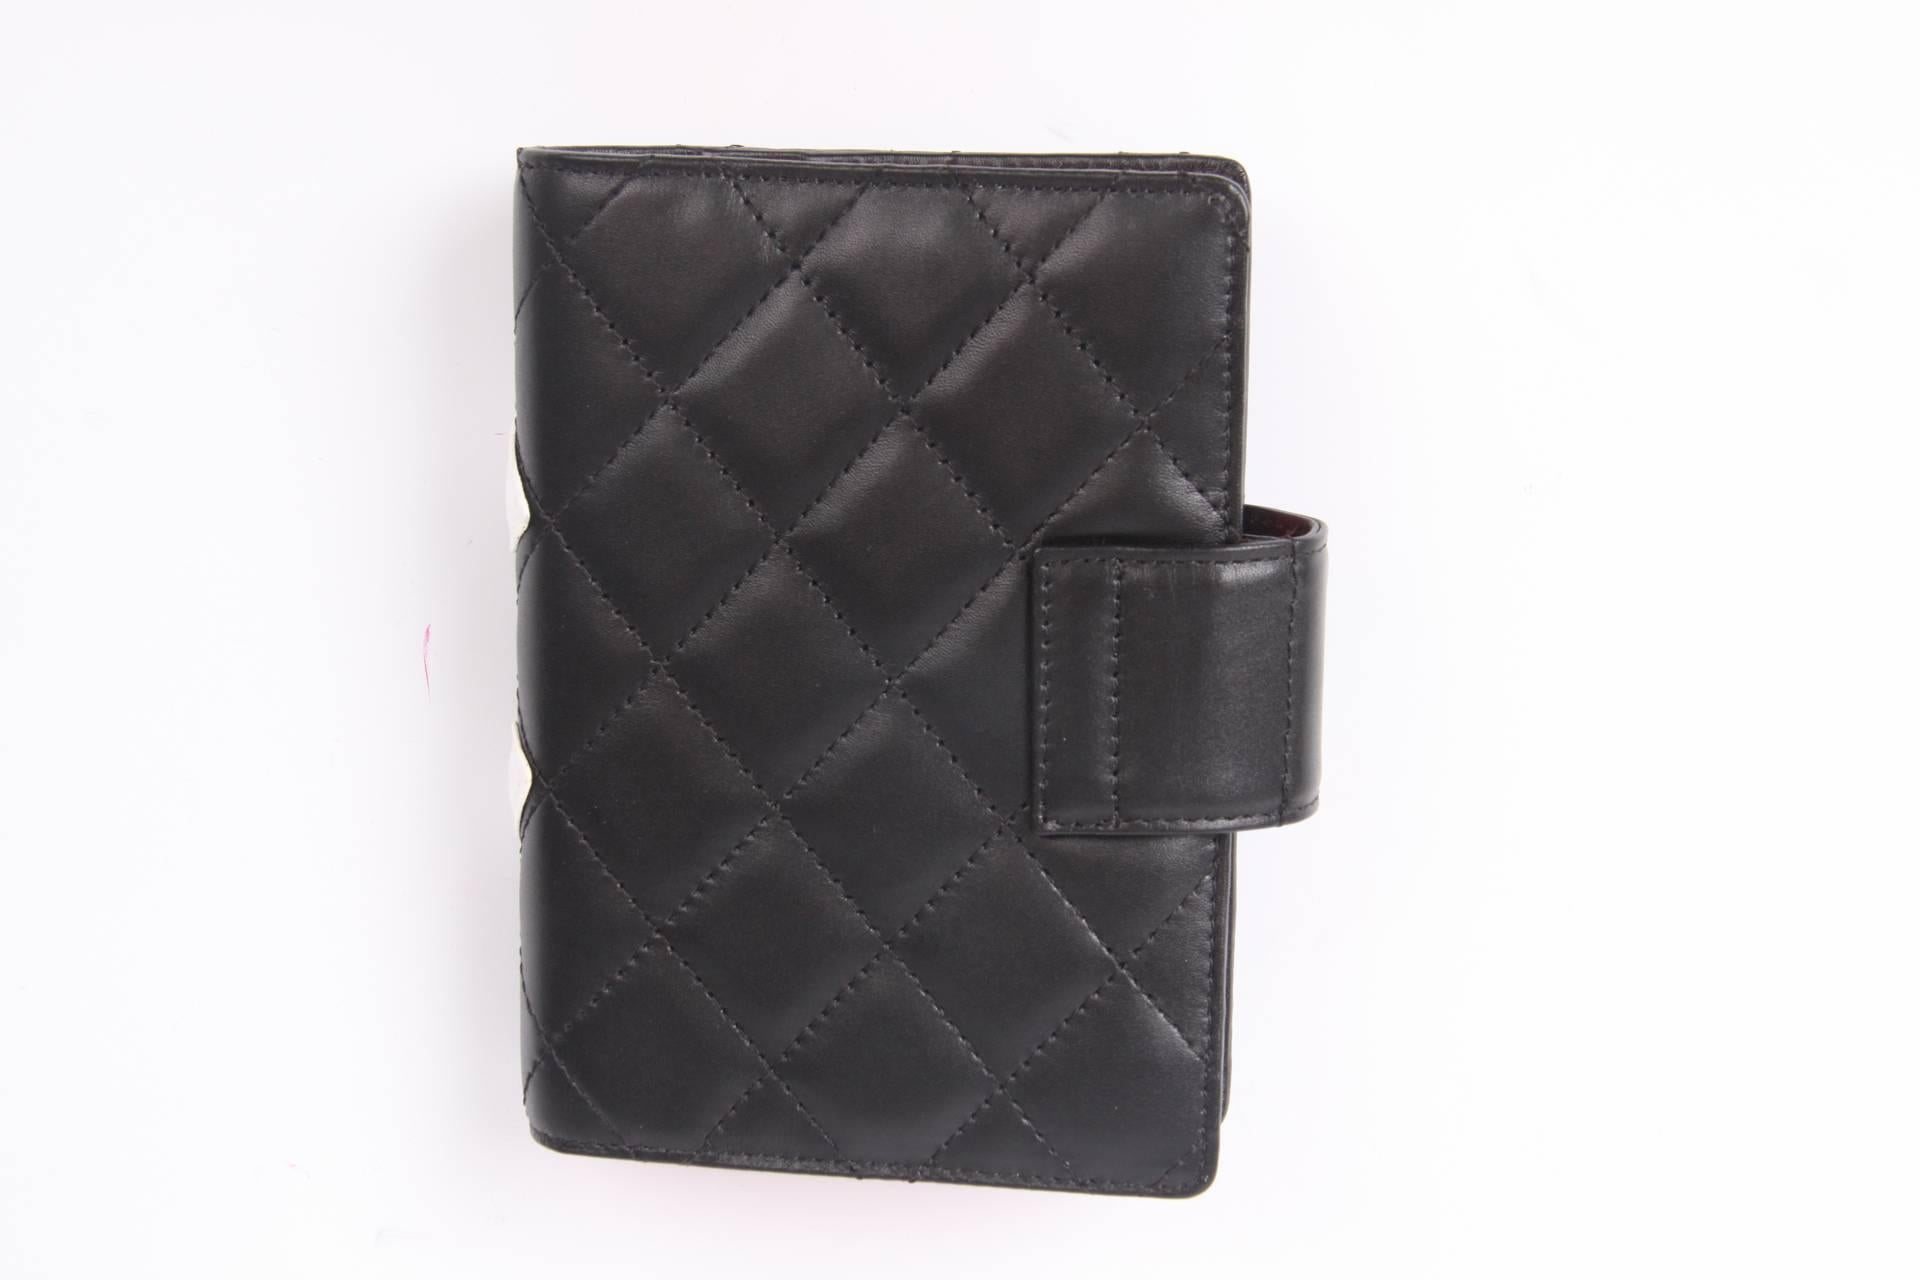 This one is brand new and fantastic! It is the Chanel Quilted Ligne Cambon Agenda Cover in black and white leather.

The black leather is fully quilted and has a large stitched CC logo in white. On the inside lining in bright pink covered with CC